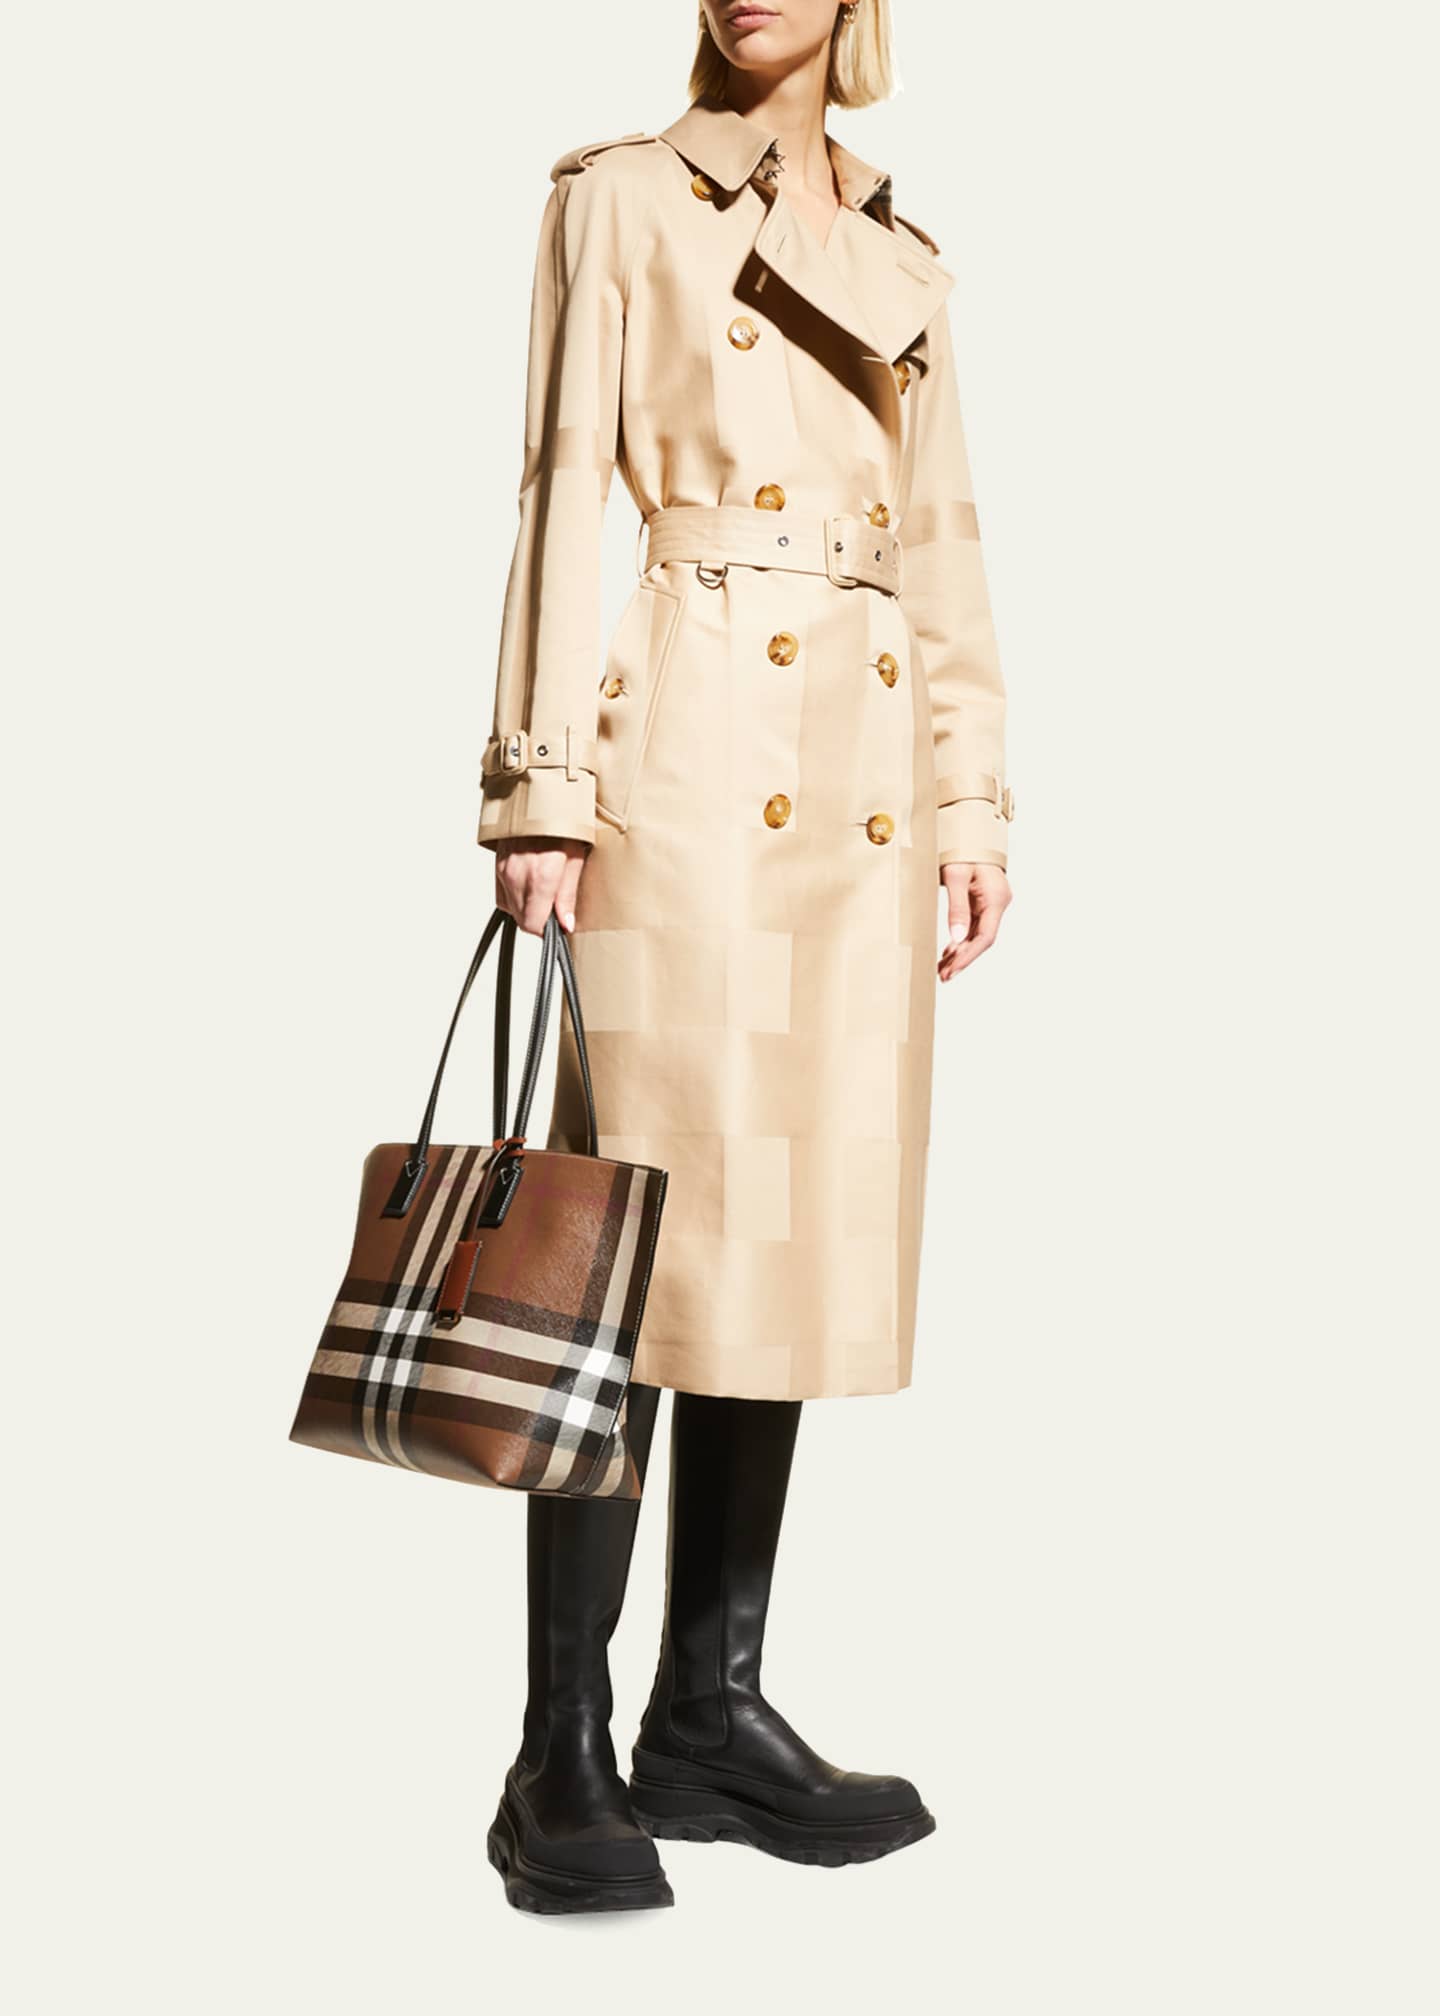 Burberry Men's Trench Patent Leather Tote Bag - Bergdorf Goodman